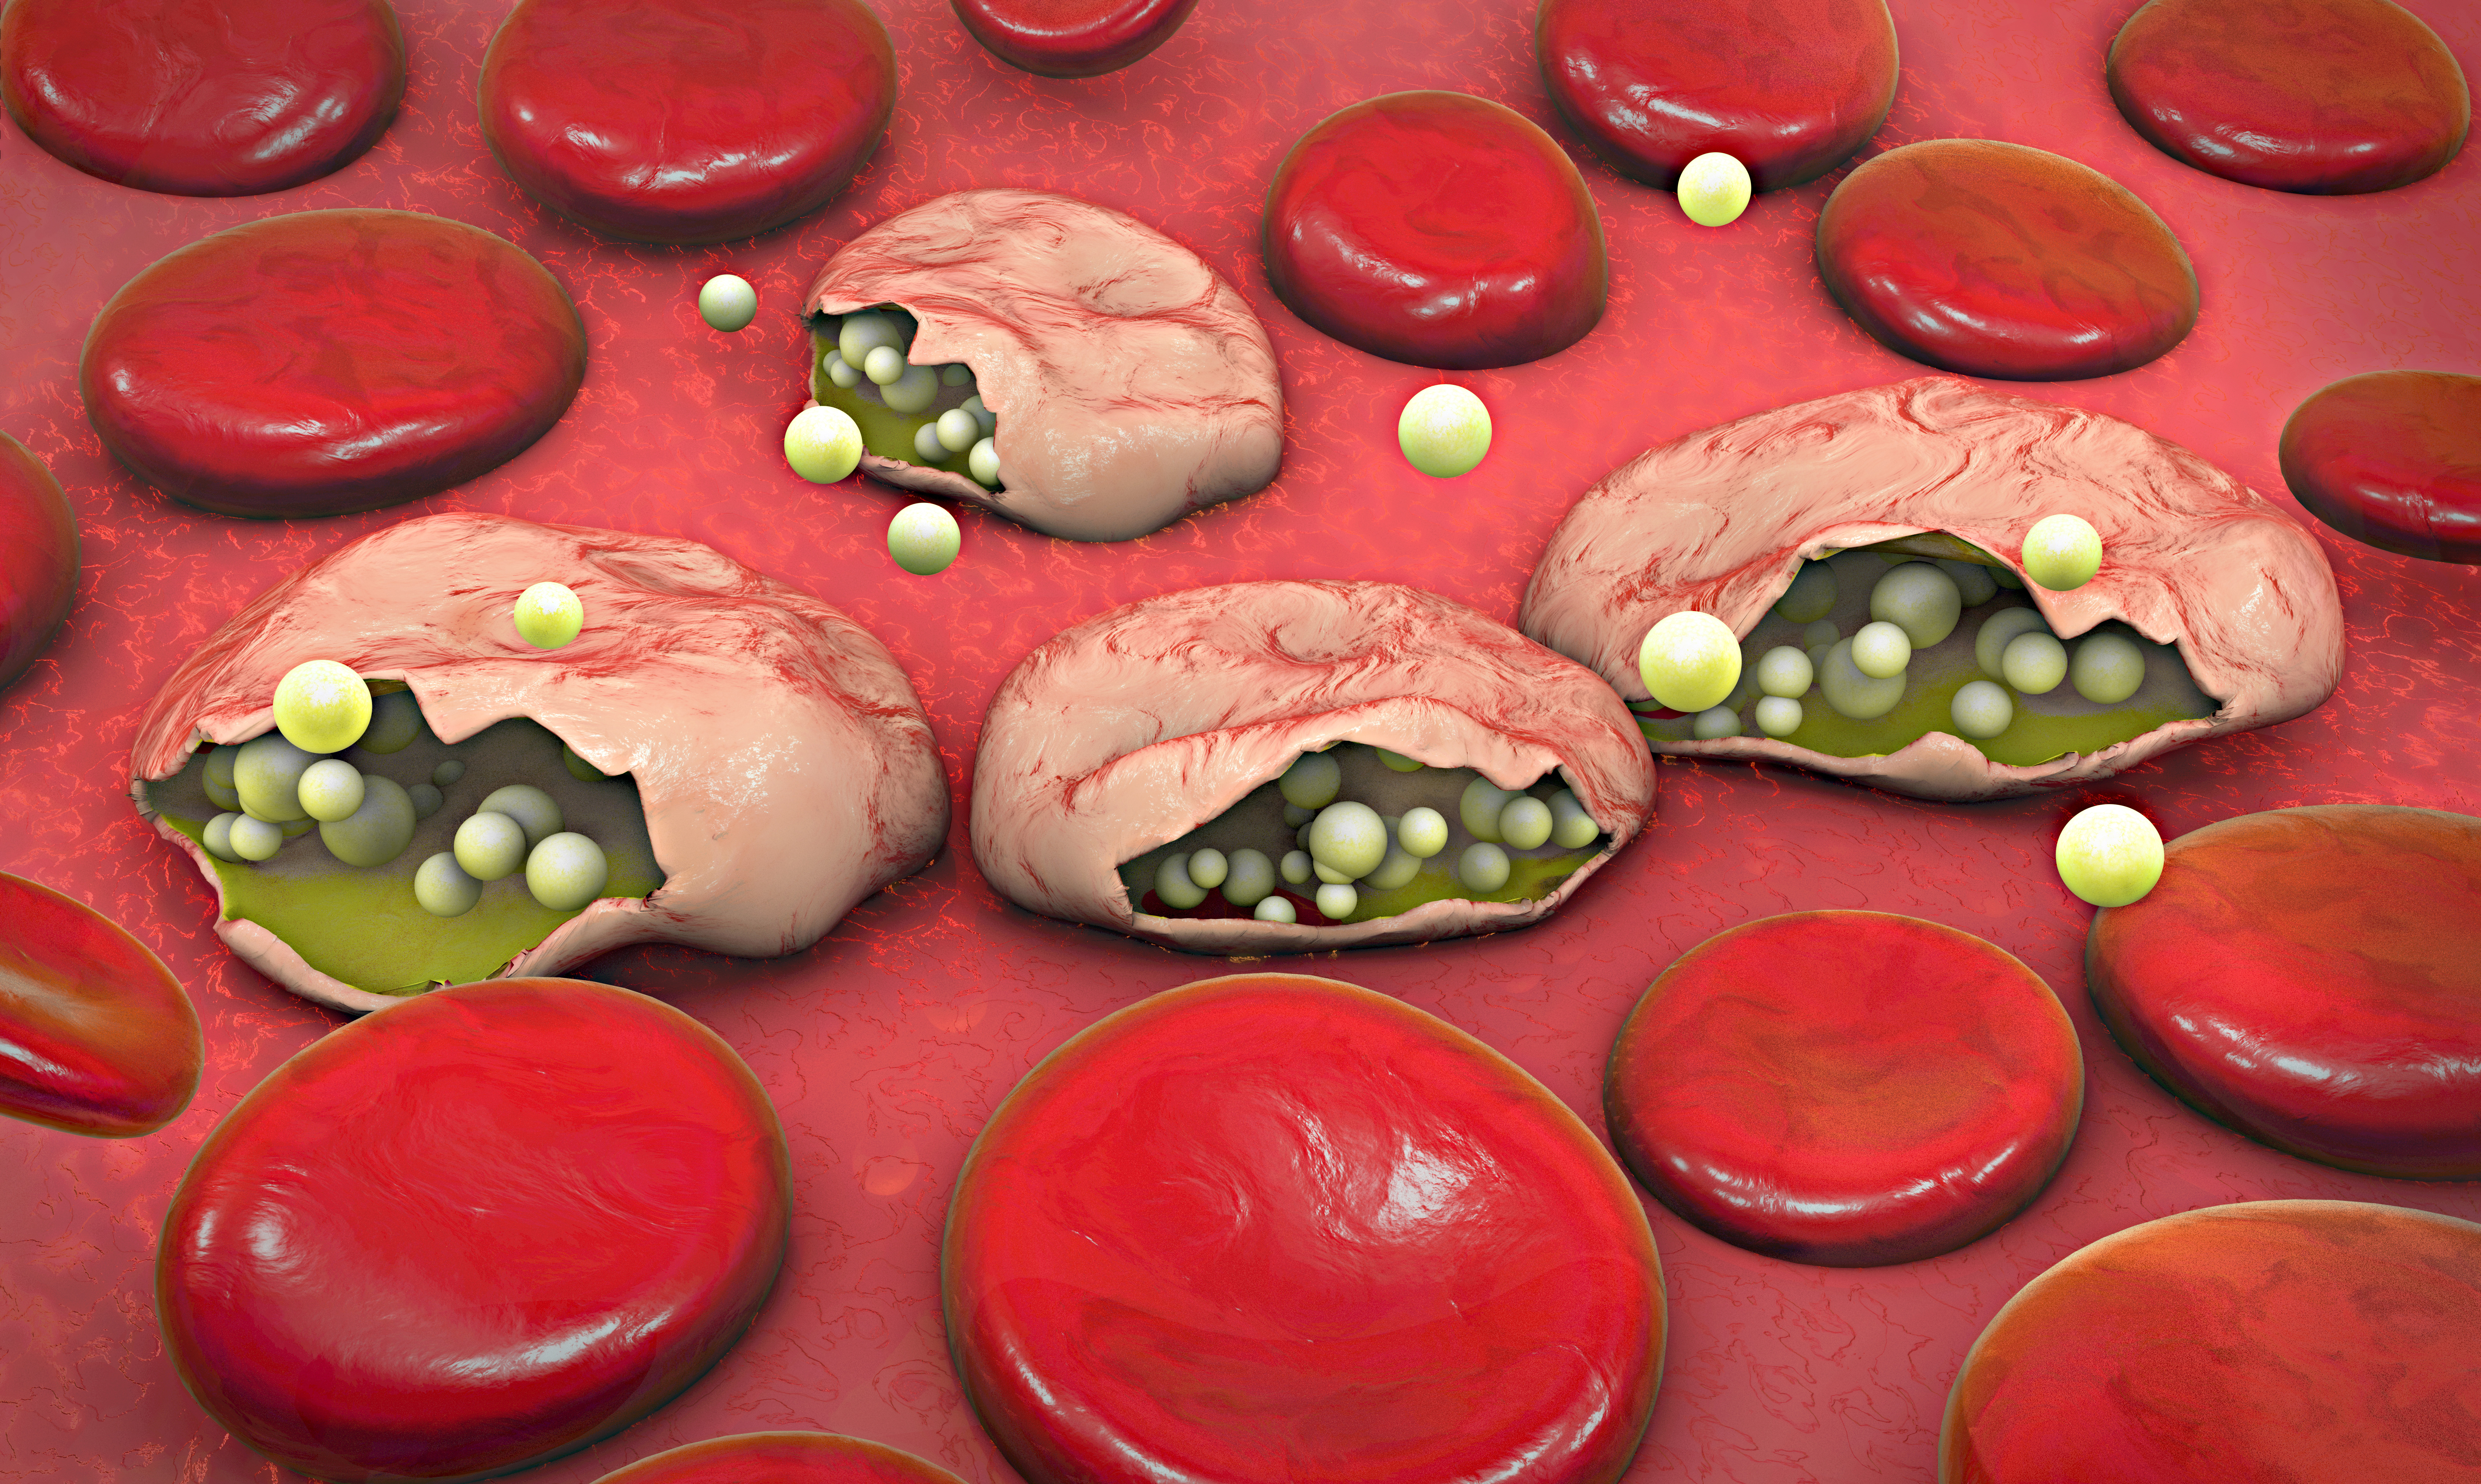 Computer drawn illustration of many red blood cells, four of which are a lighter, unhealthy-looking color and appear to be burst open with yellowish spheres leaking out.